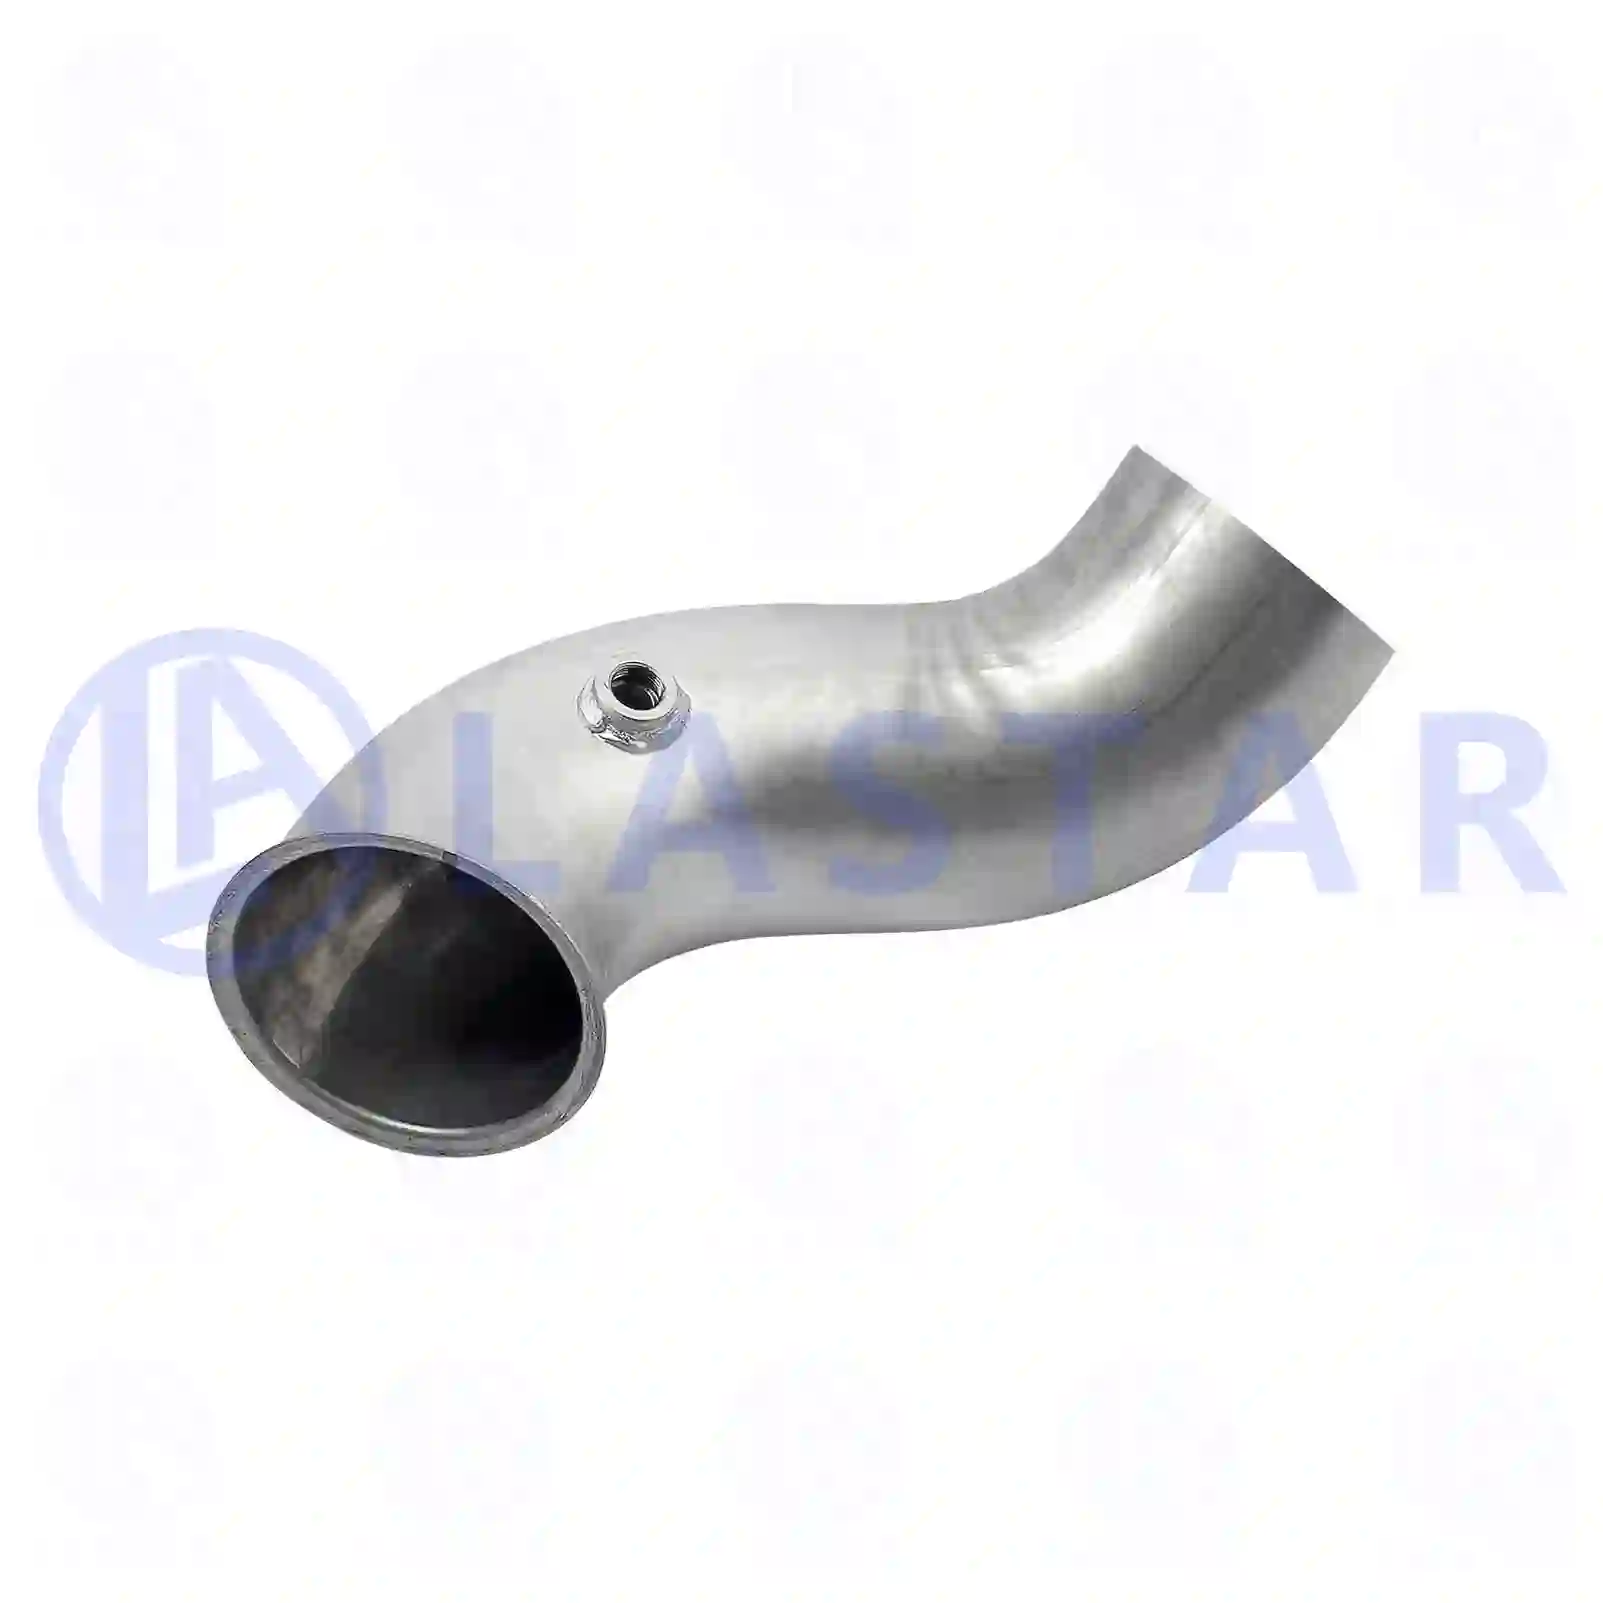 Exhaust pipe, 77707033, 1770280, ZG10293-0008 ||  77707033 Lastar Spare Part | Truck Spare Parts, Auotomotive Spare Parts Exhaust pipe, 77707033, 1770280, ZG10293-0008 ||  77707033 Lastar Spare Part | Truck Spare Parts, Auotomotive Spare Parts